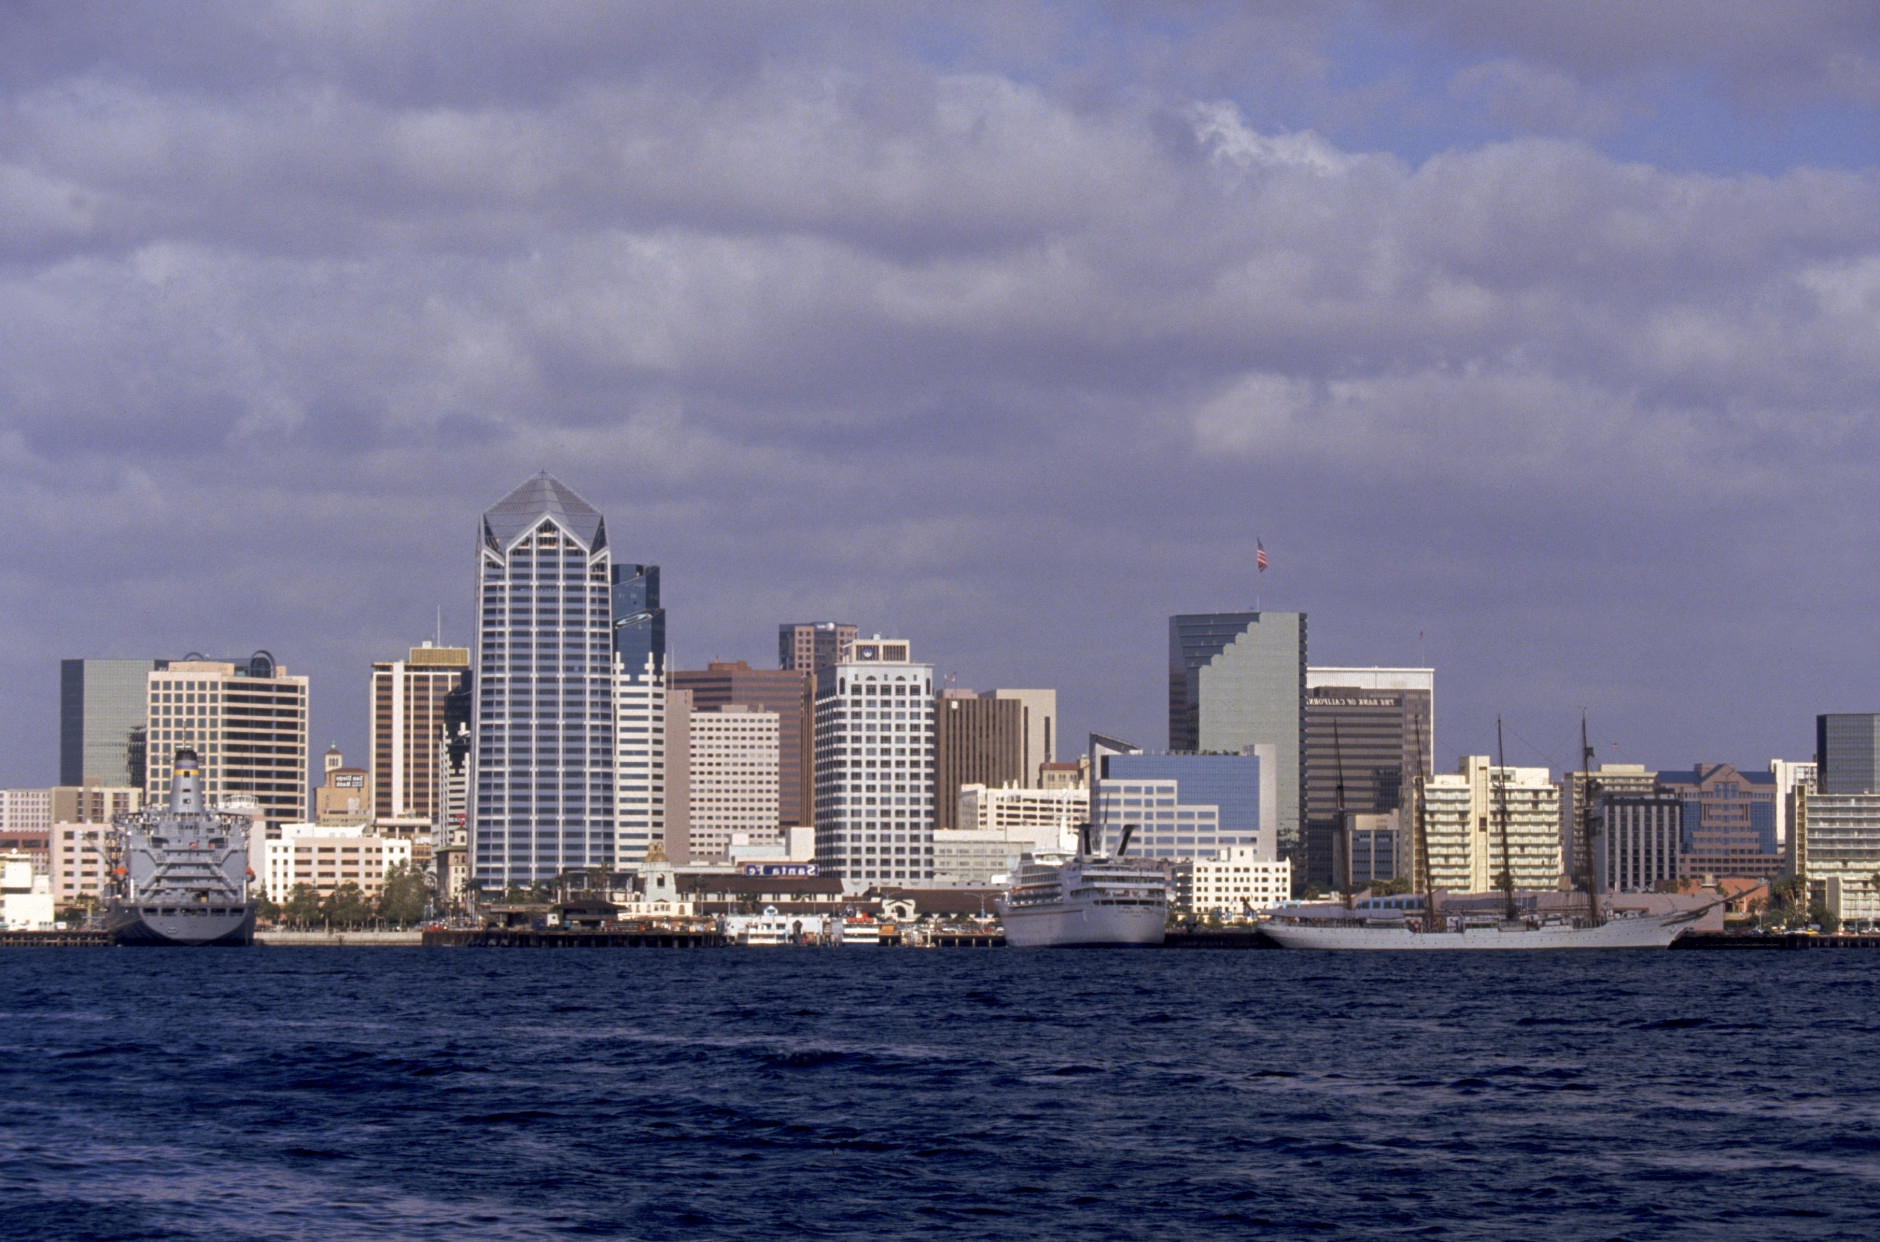 SAN DIEGO - FEBRUARY 20:  General view of downtown San Diego: the host city for the 1992 America's Cup class world championships shot on February 20, 1992. (Photo by Ken Levine /Getty Images)